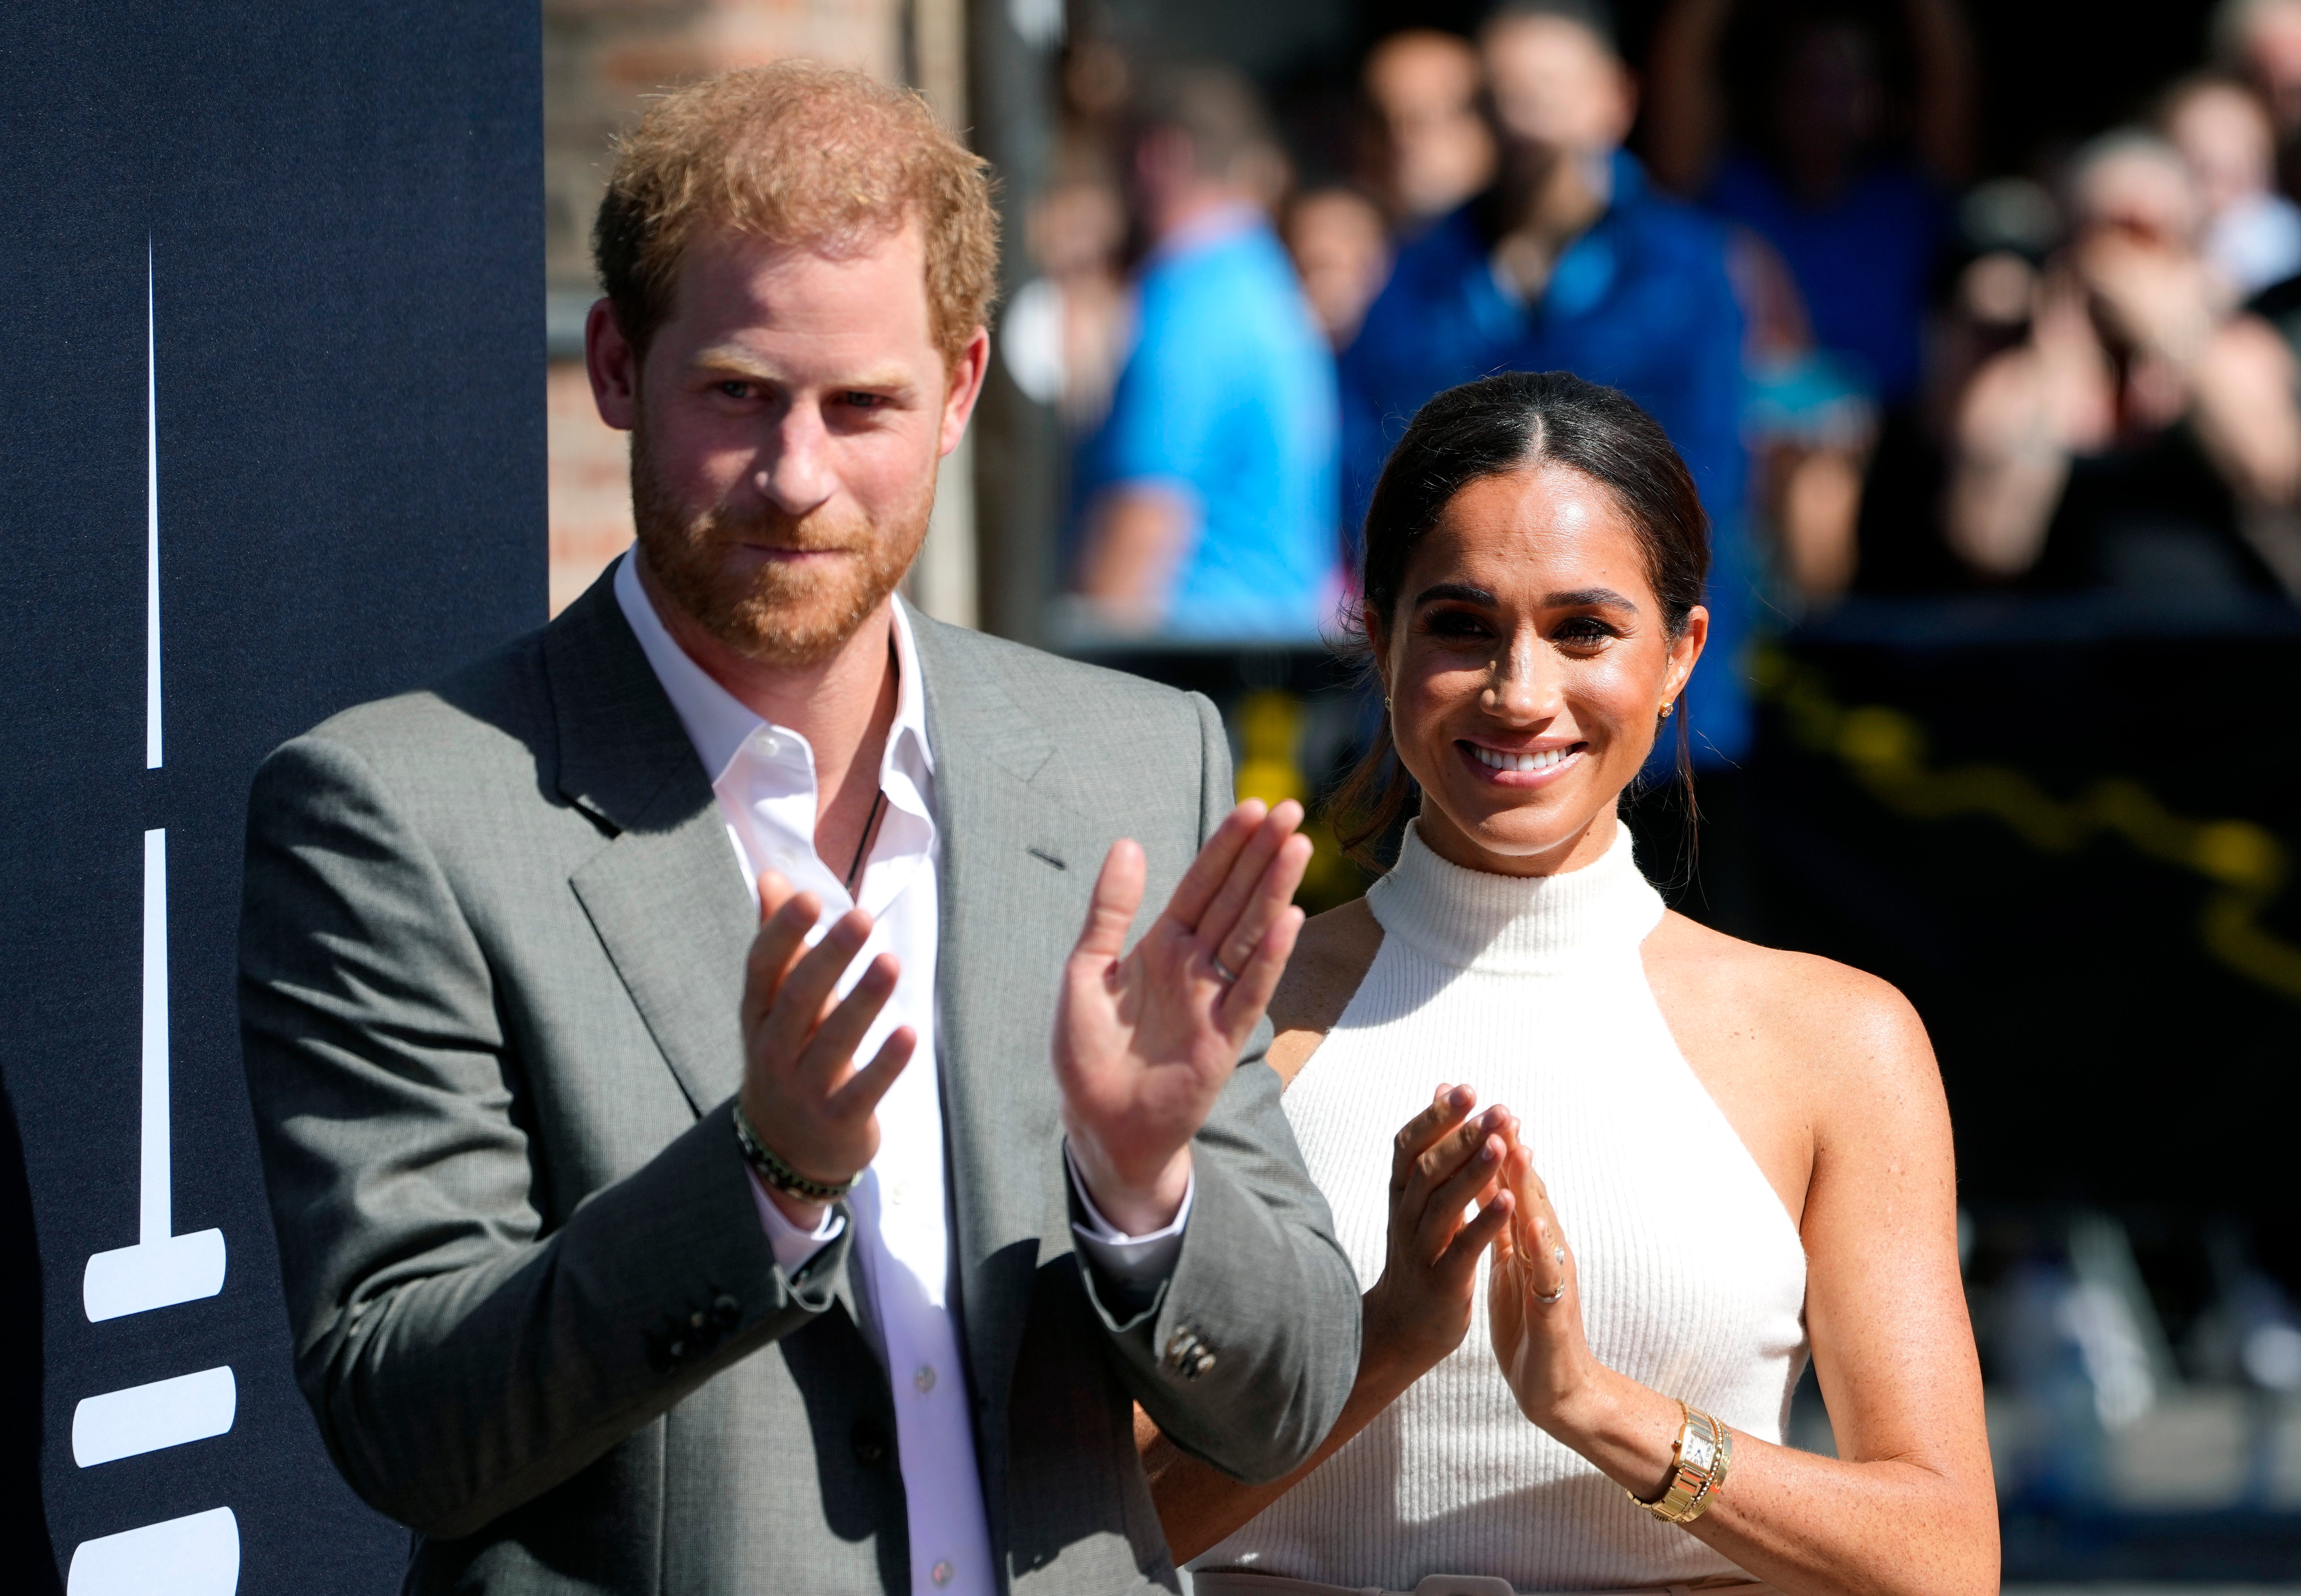 Prince Harry came to the UK to see his father but his wife Meghan once again stayed behind in the US